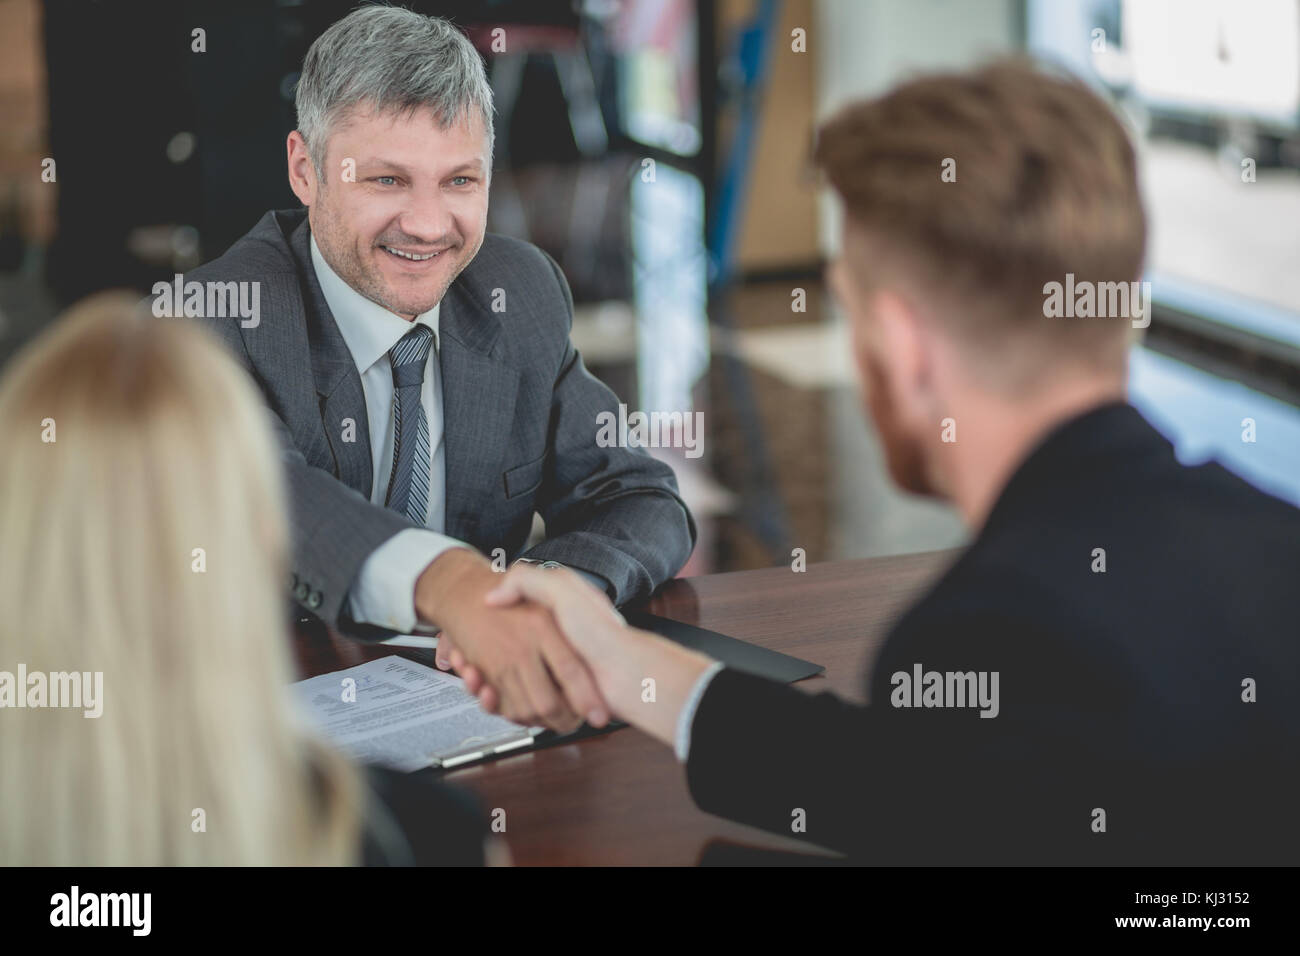 Auto dealer agent signing purchasing contract with a buyer, shaking hands. Stock Photo